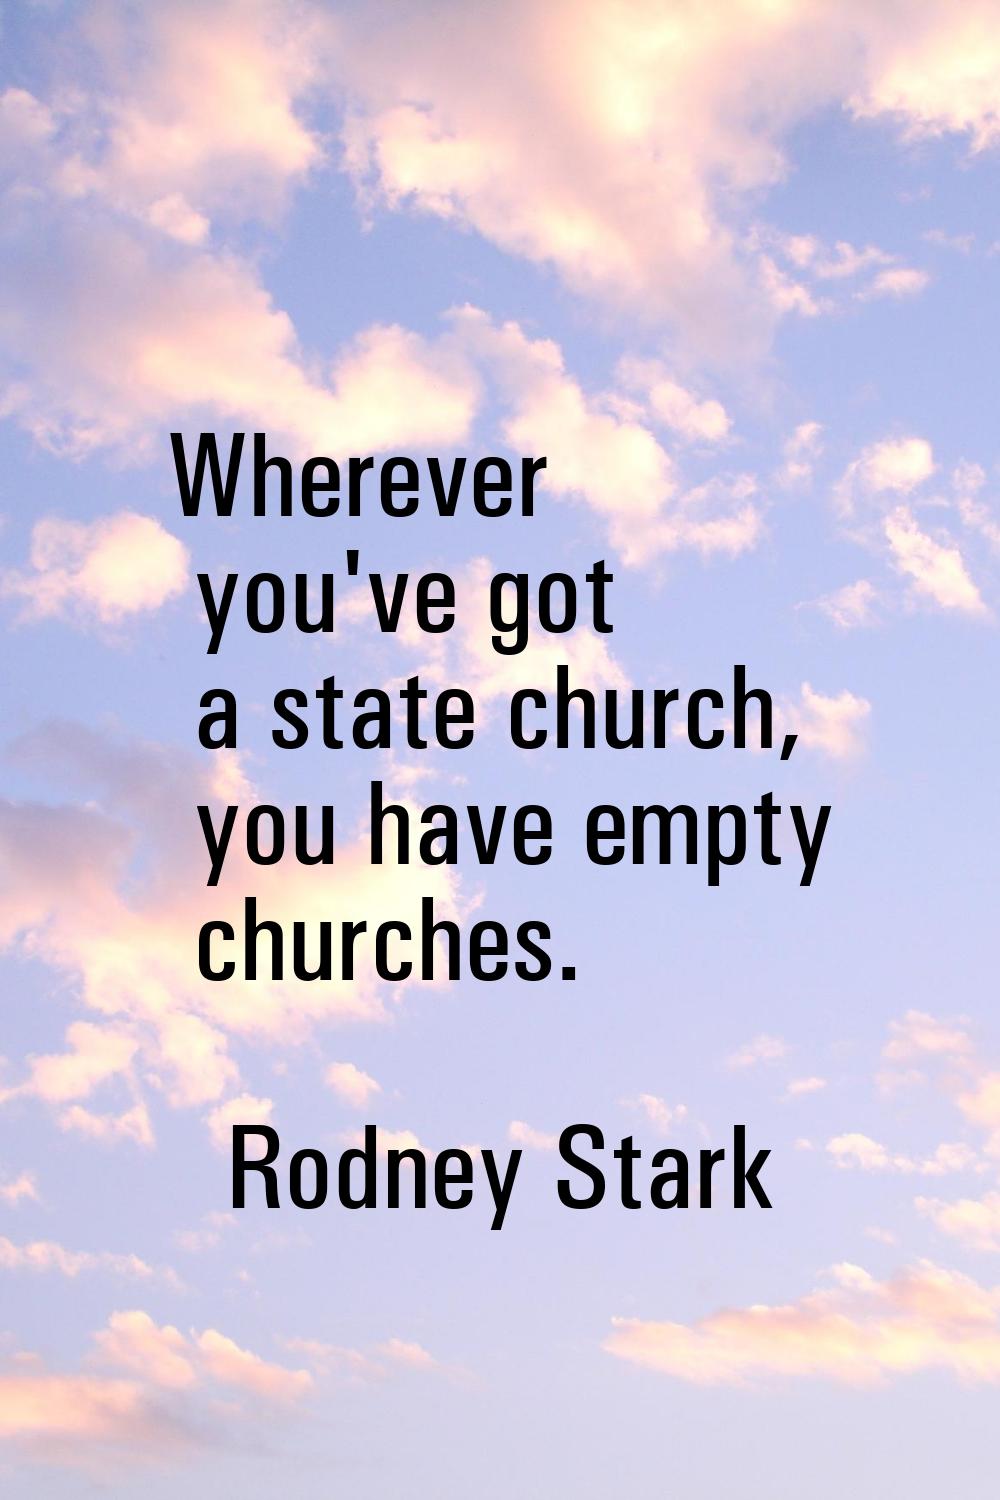 Wherever you've got a state church, you have empty churches.